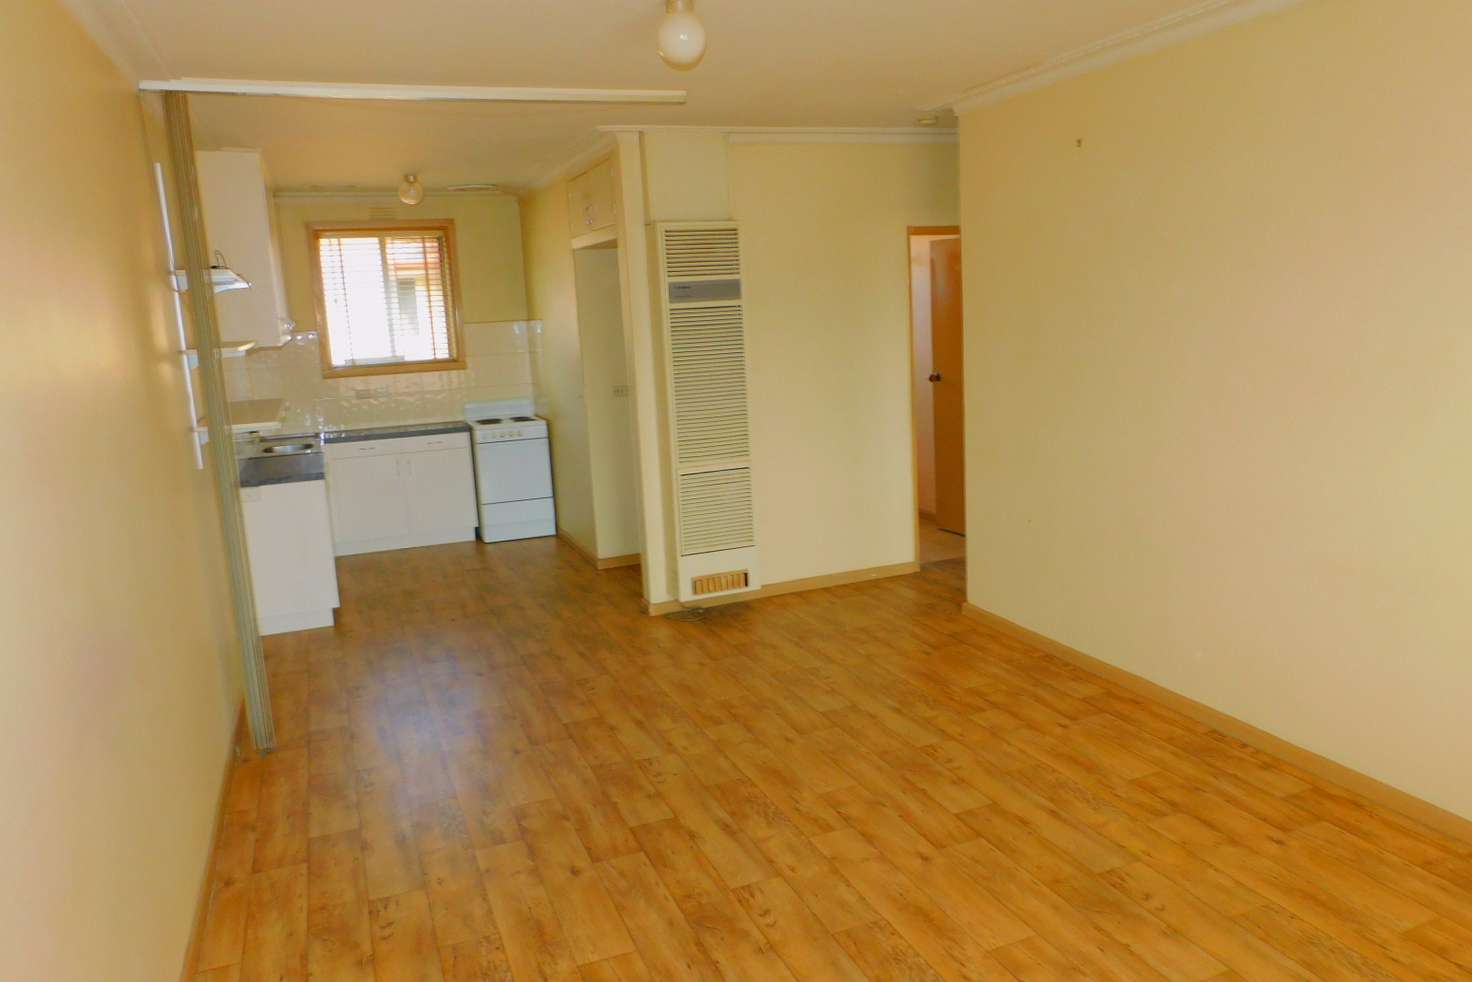 Main view of Homely house listing, 8/12 Surrey St., Pascoe Vale VIC 3044